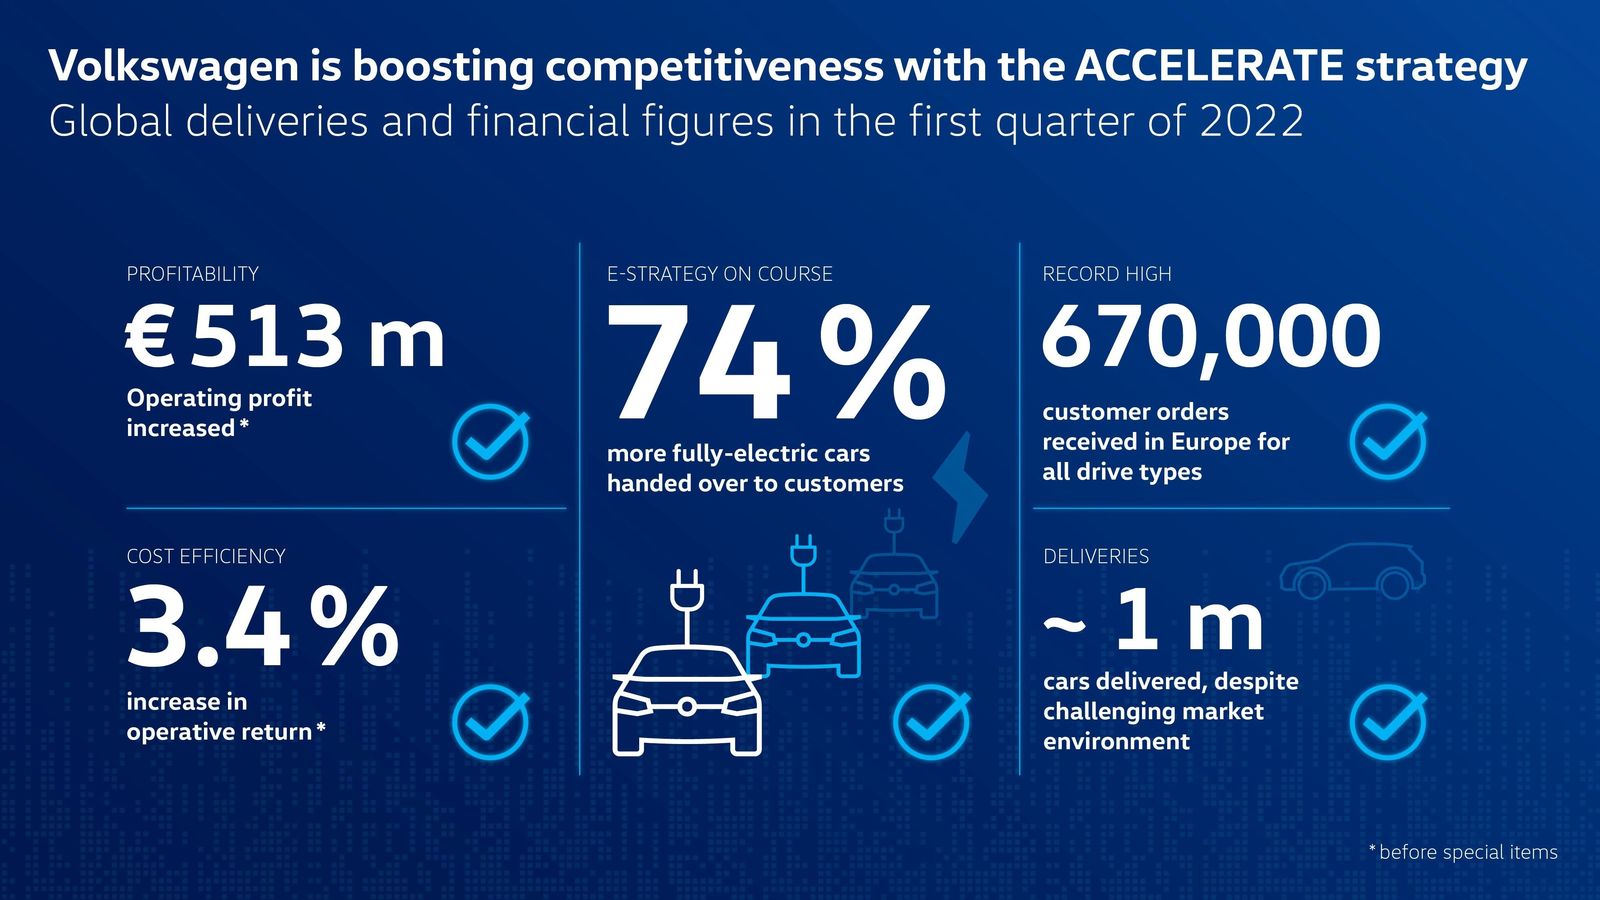 Volkswagen improves cost efficiency and economic efficiency in a tough environment